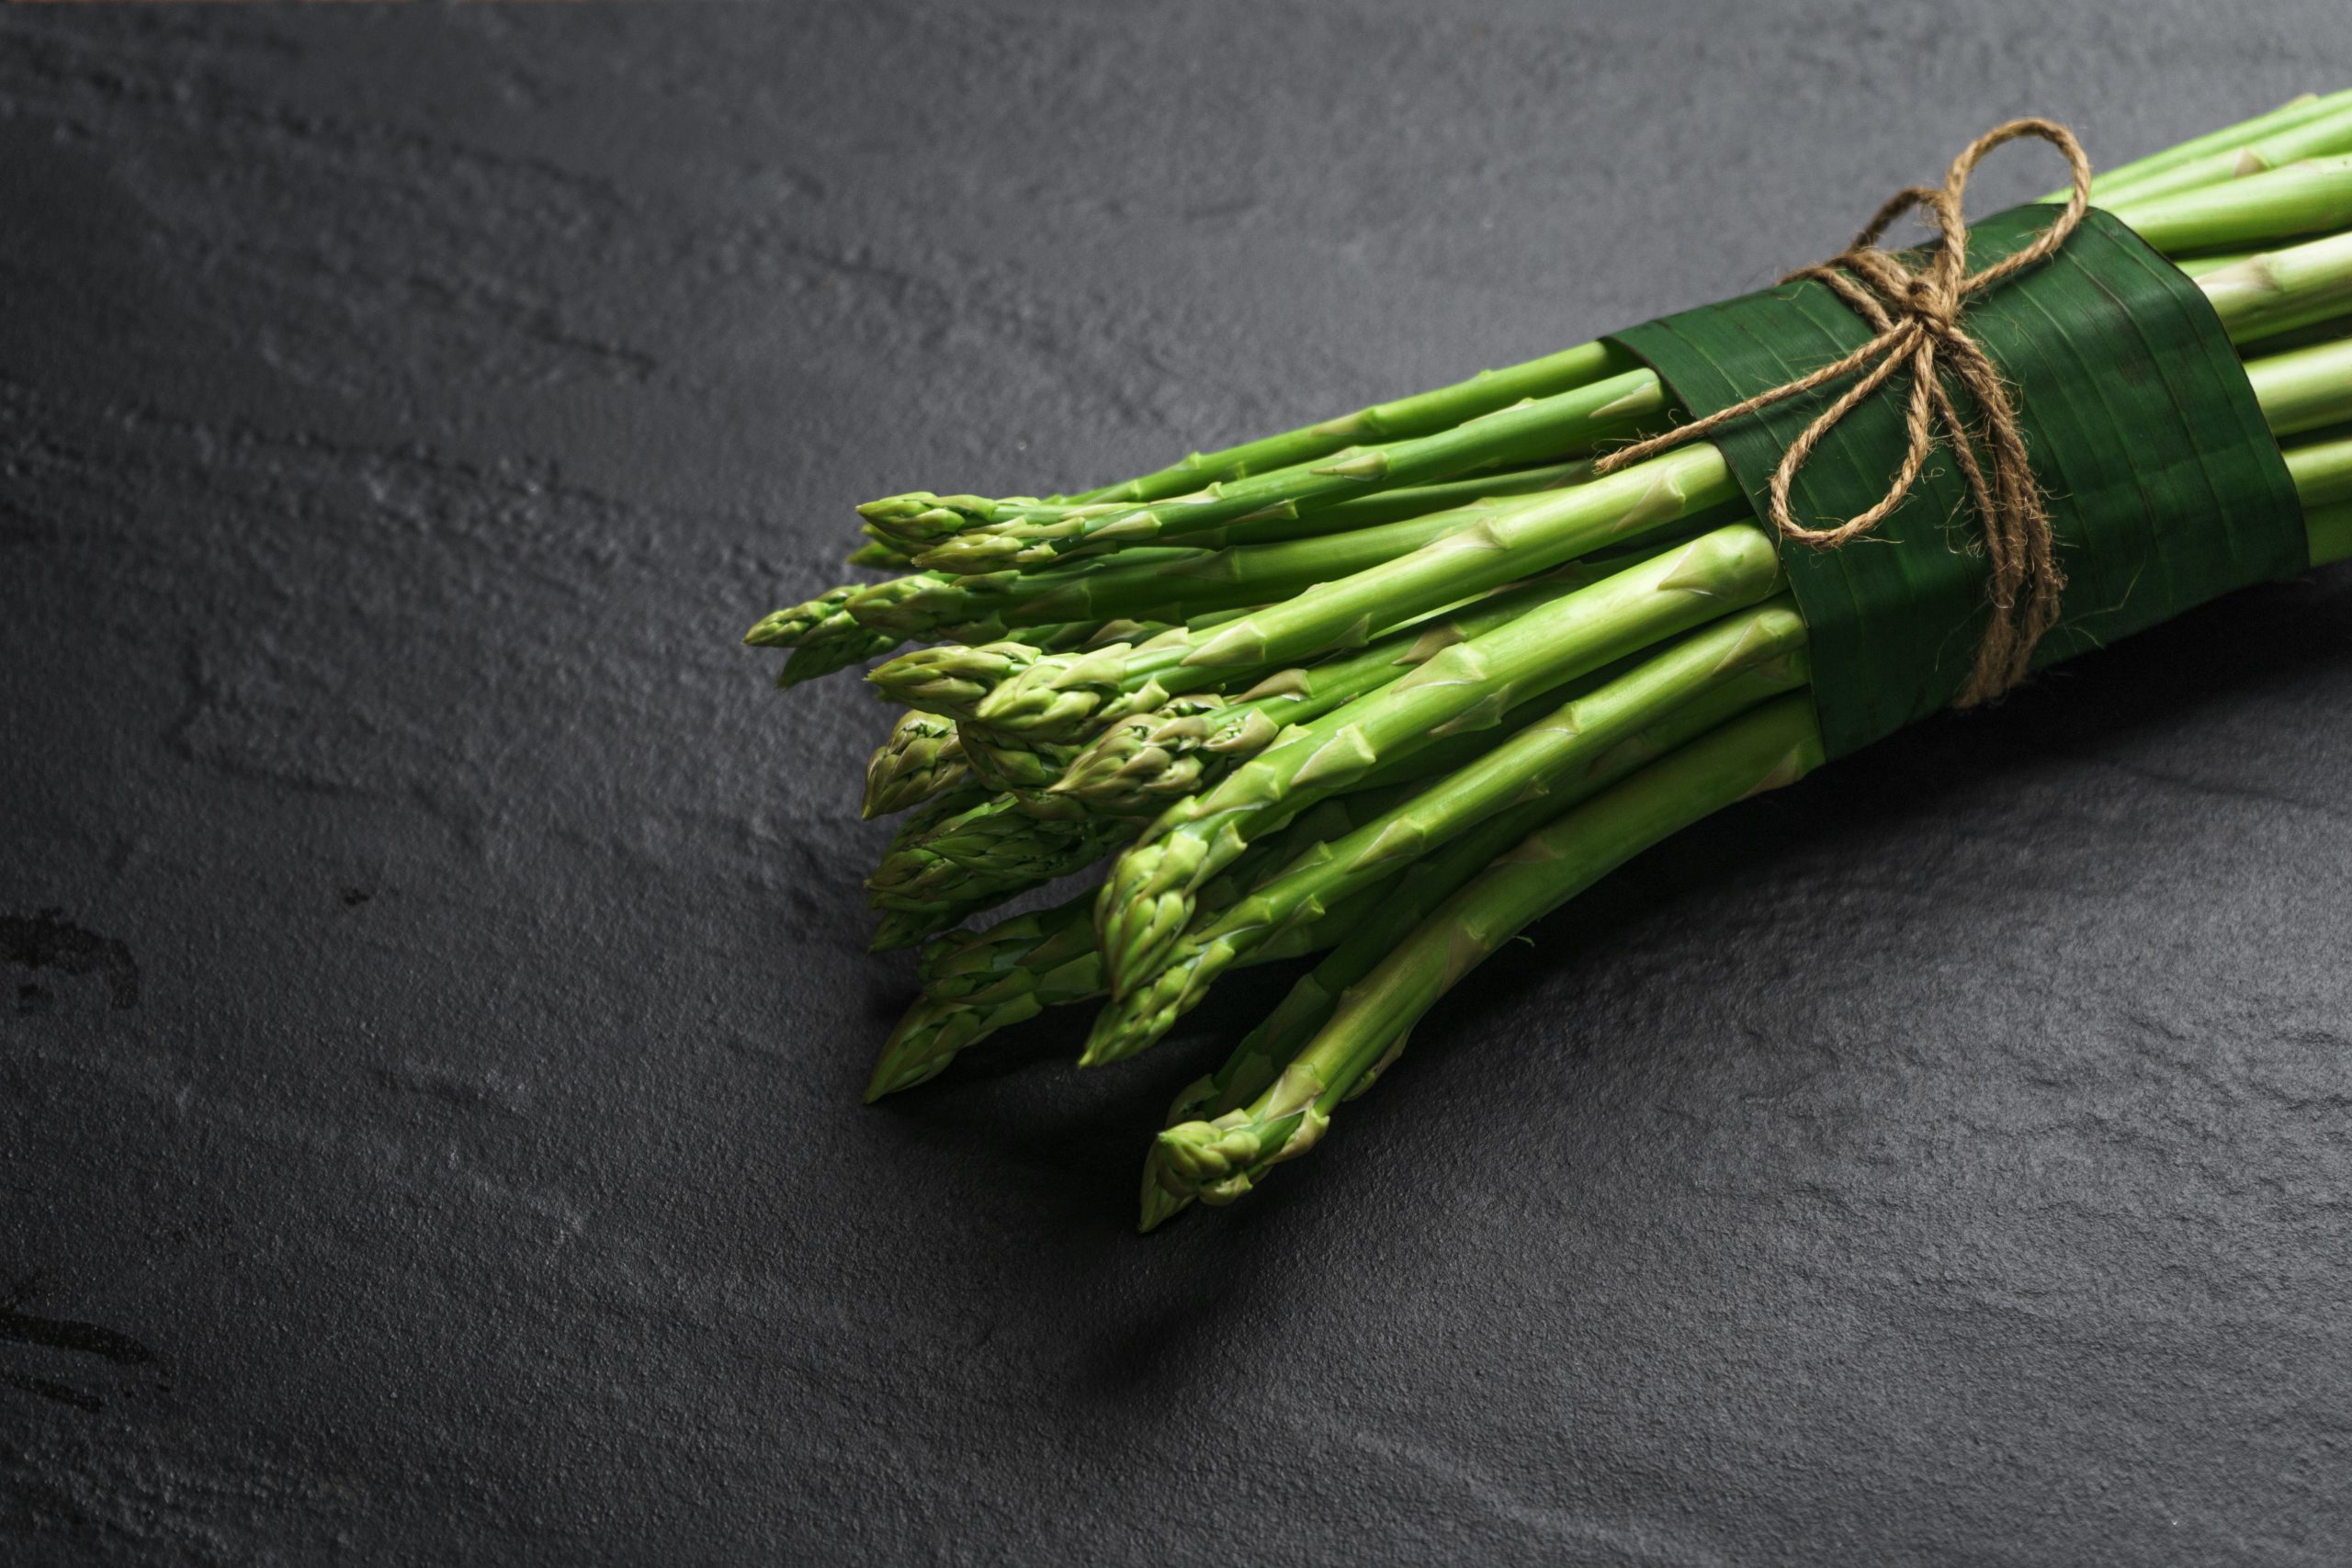 How To Cook Asparagus In Air Fryer